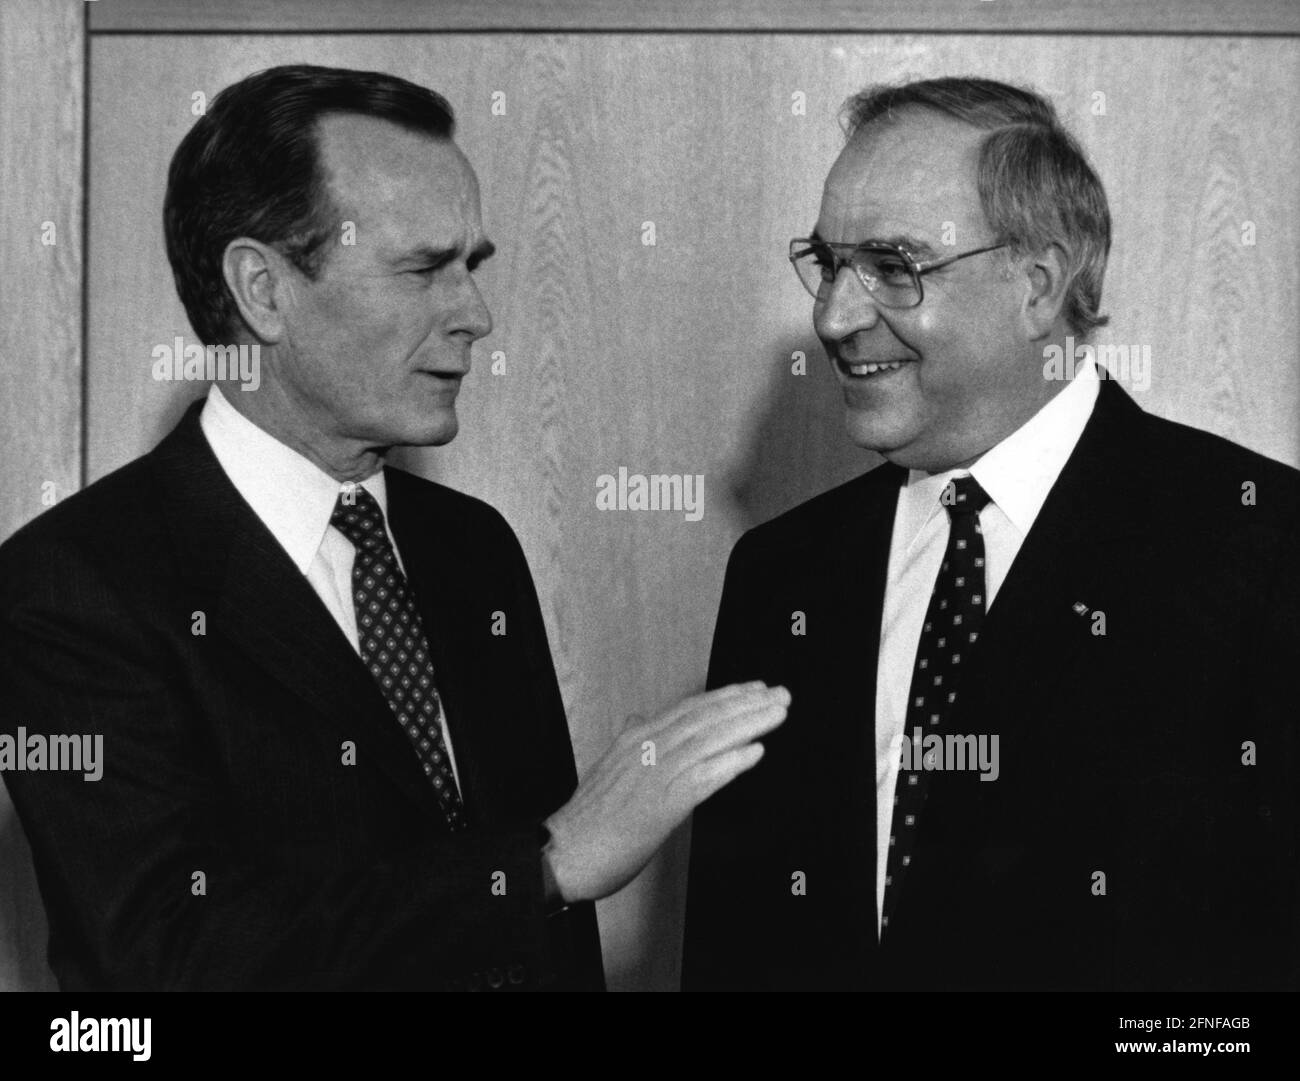 George Bush meets German Chancellor Helmut Kohl, presumably during his time as American Vice President. Undated photograph, presumably during the visit to Germany in 1985. [automated translation] Stock Photo